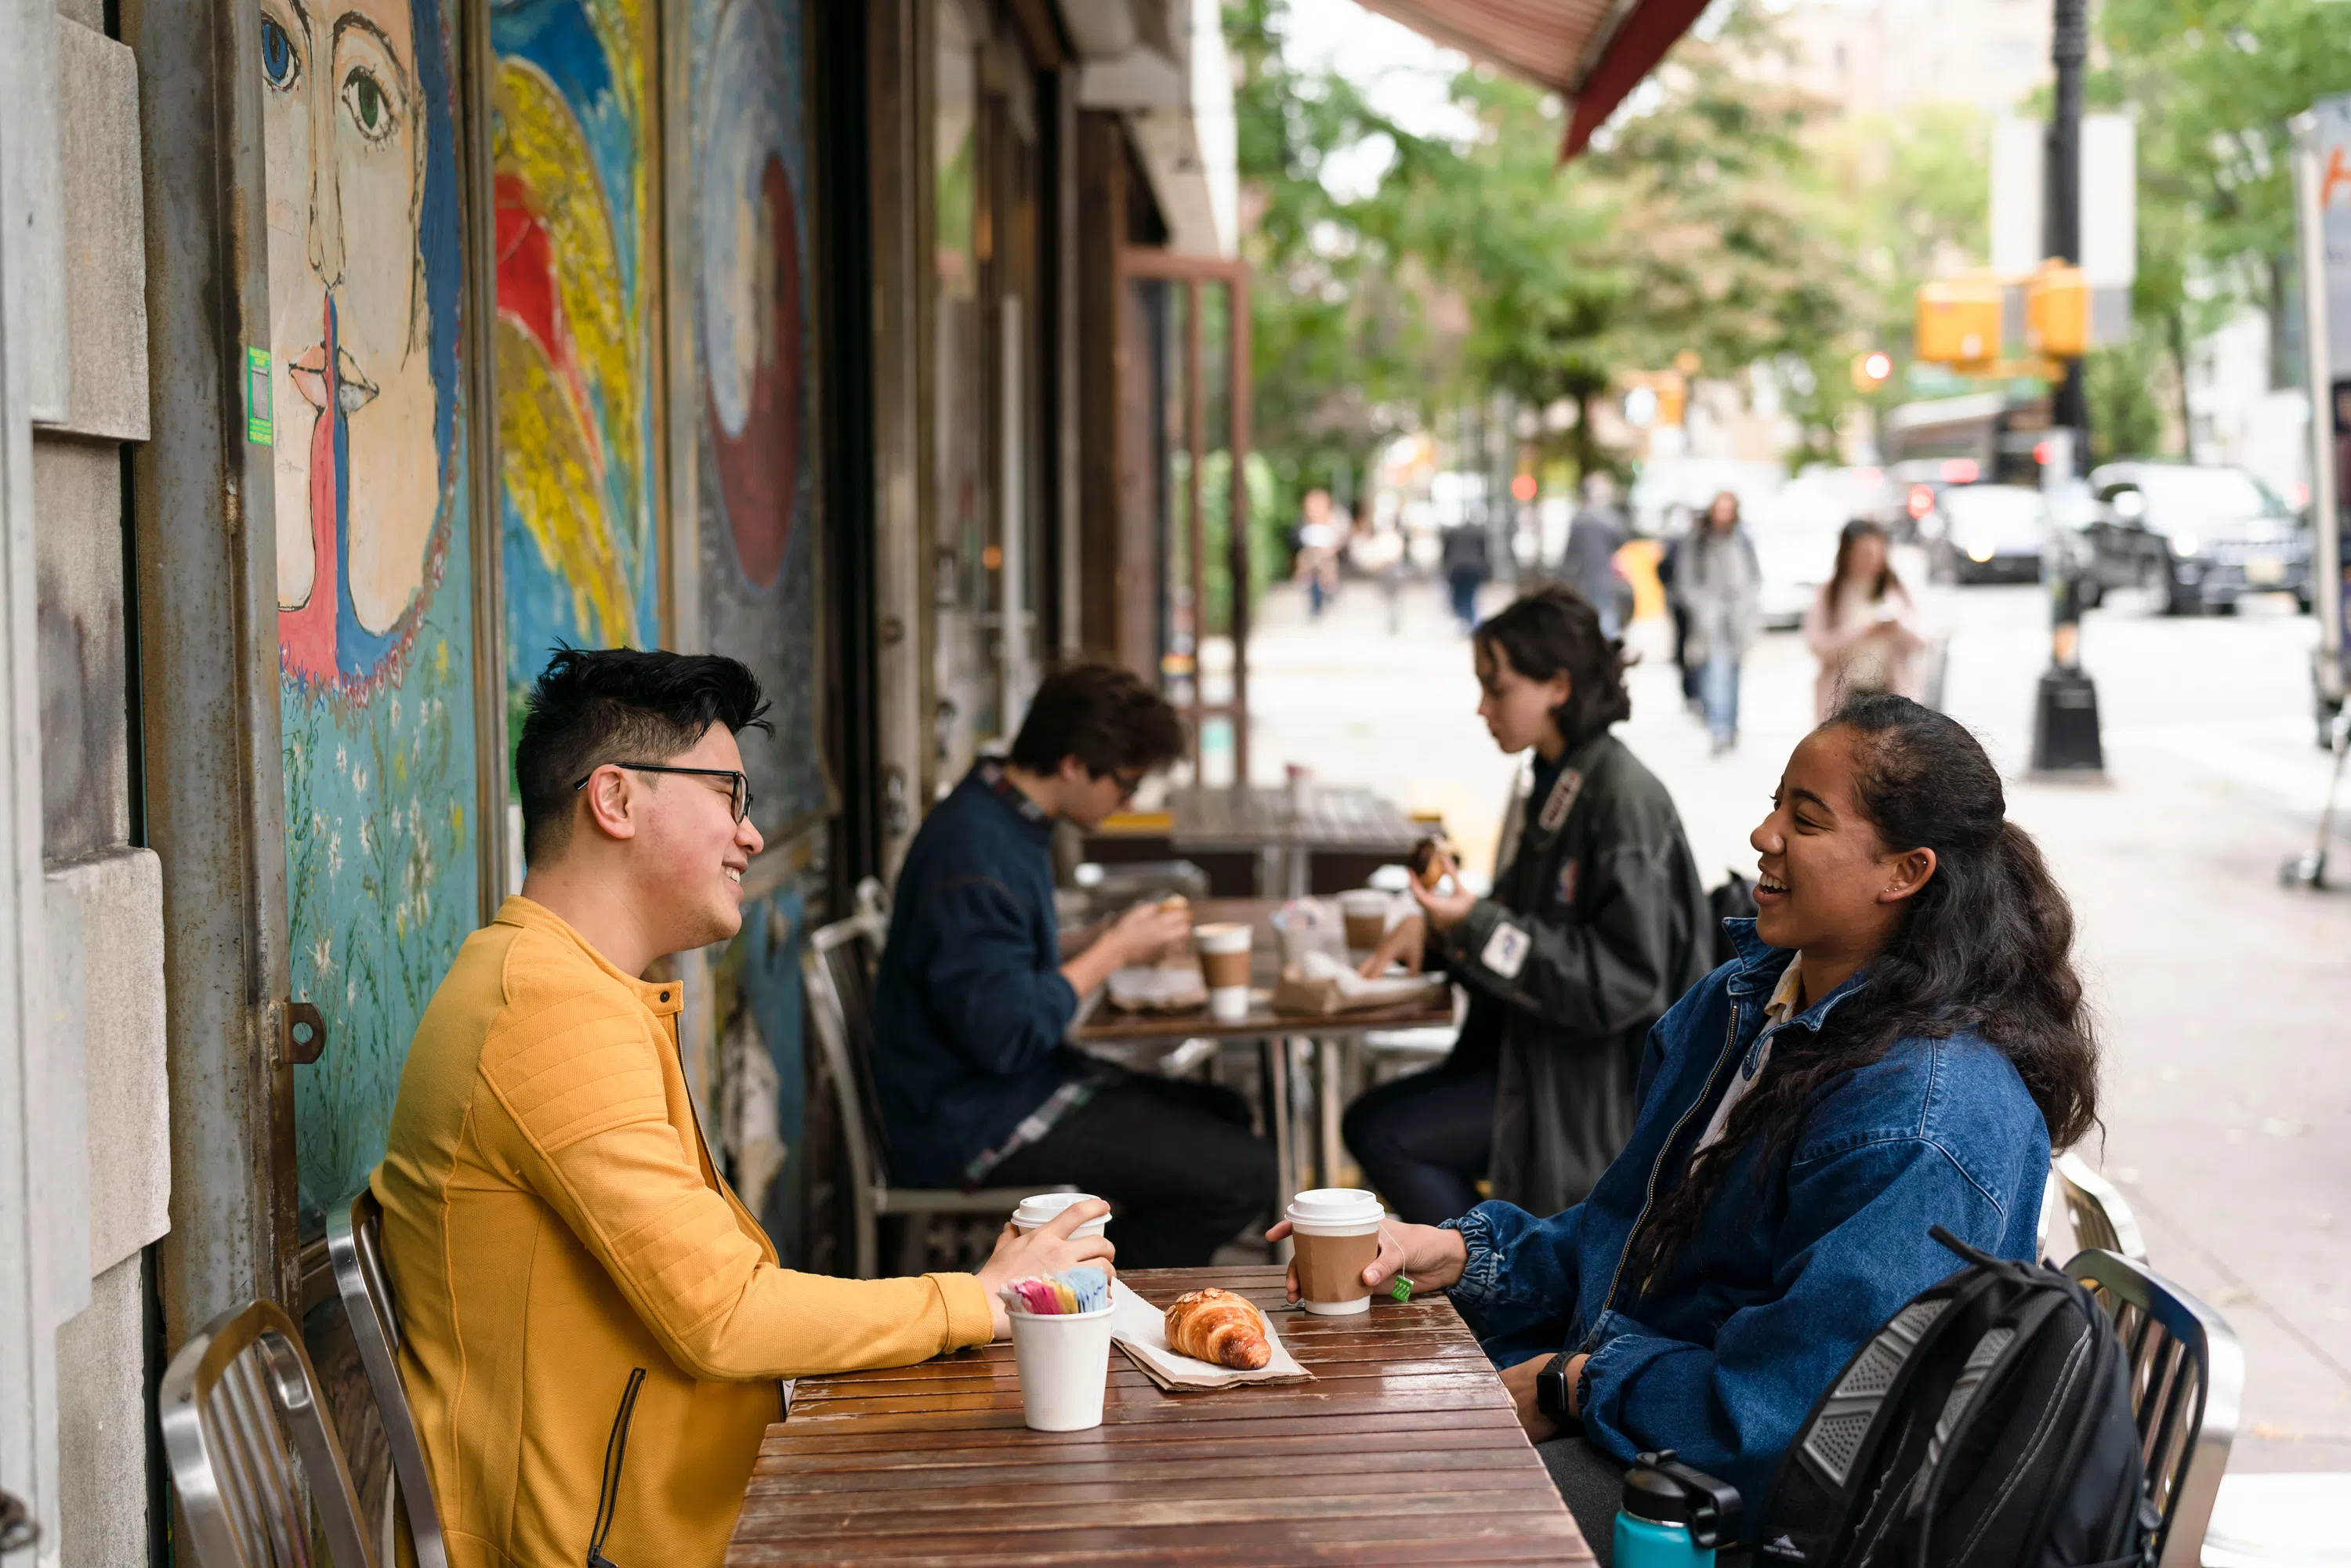 Two students, one male and one female, sit across from each other at a small wooden table. They are an an outdoor cafe and talk over coffee and pastries.